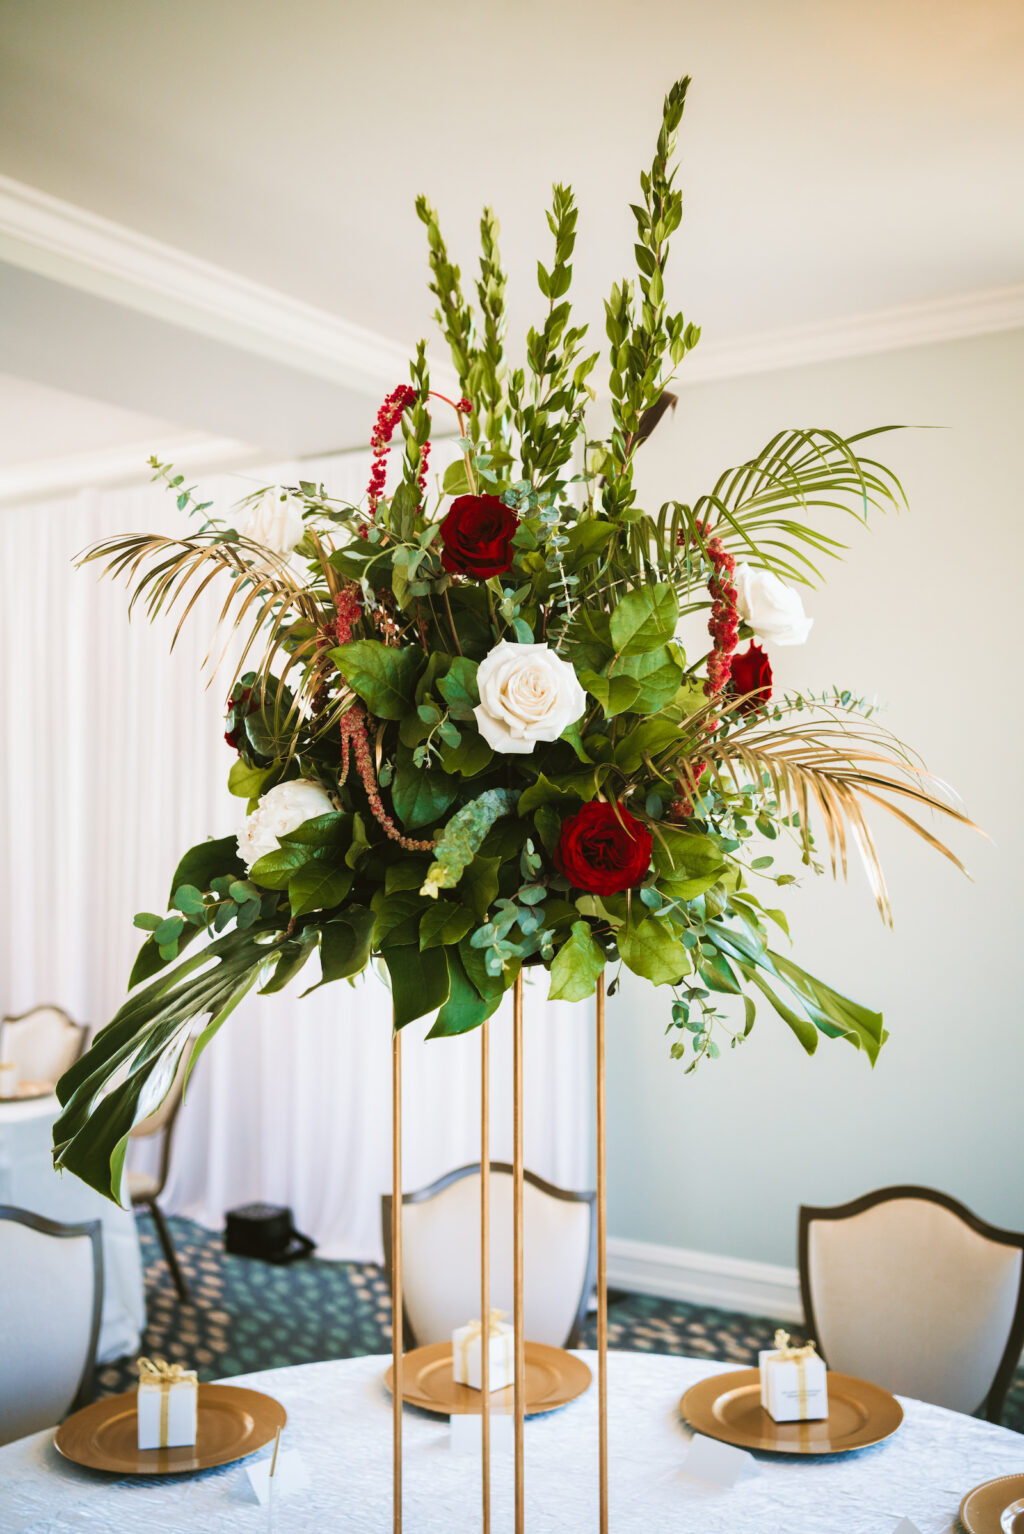 Fall wedding reception decor, tall gold stand with burgundy red and white roses, hanging amaranthus, palm fronds, greenery floral centerpiece | Tampa wedding photographer Bonnie Newman Creative | Wedding planner Coastal Coordinating | Wedding florist Iza’s Flowers